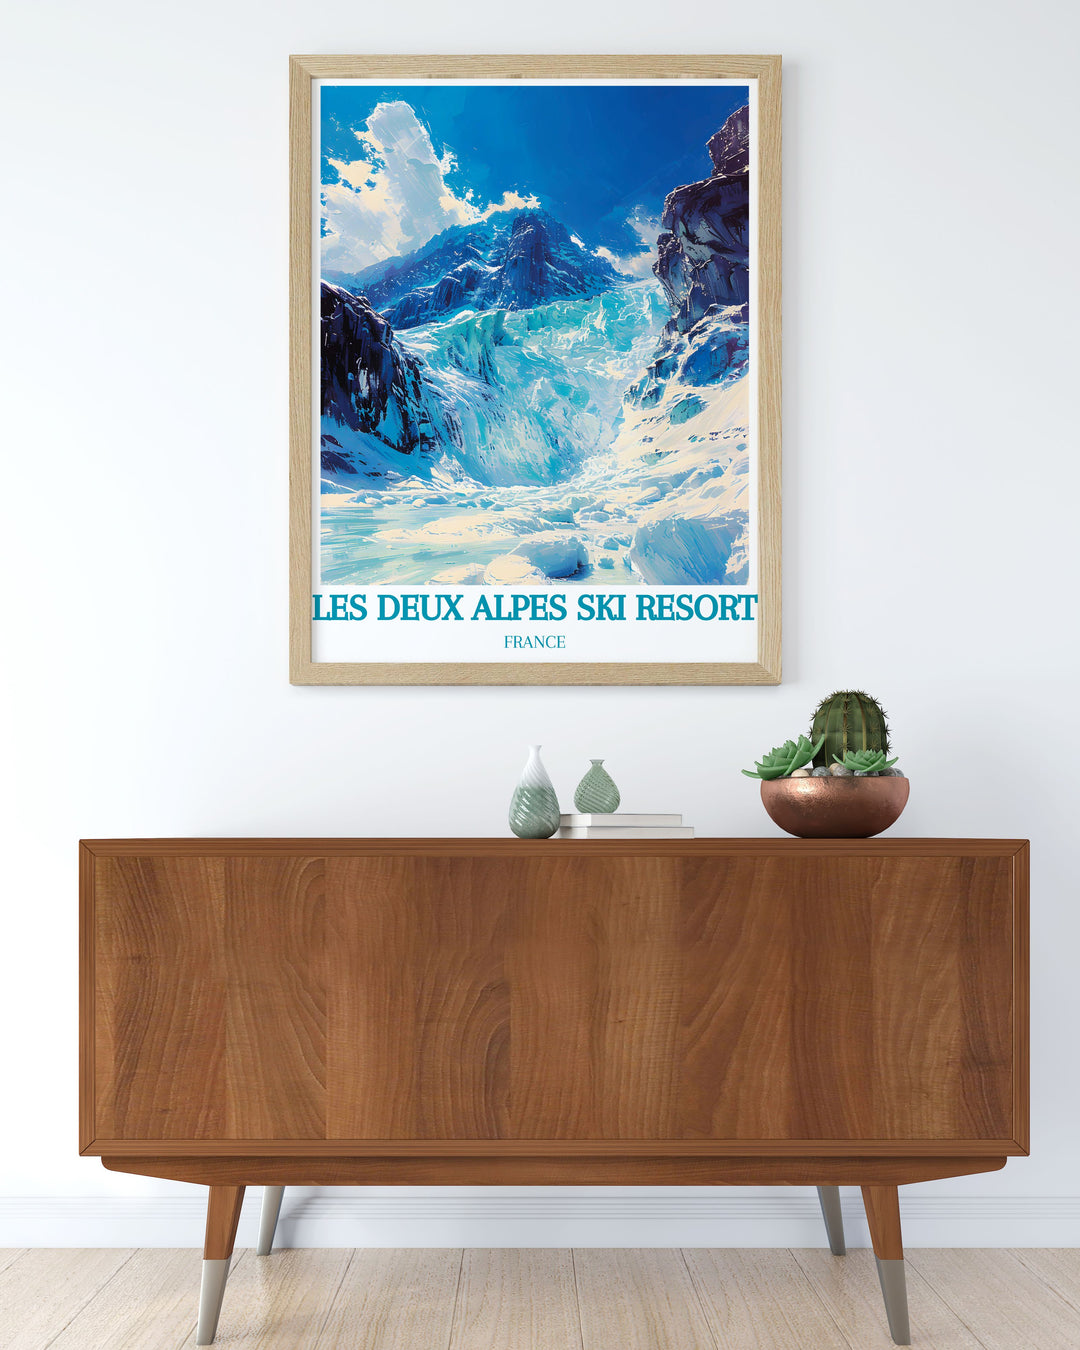 This vibrant art print of Les Deux Alpes Ski Resort captures the bustling ski village and snow covered slopes, making it a standout piece for those who love winter sports and alpine scenery.